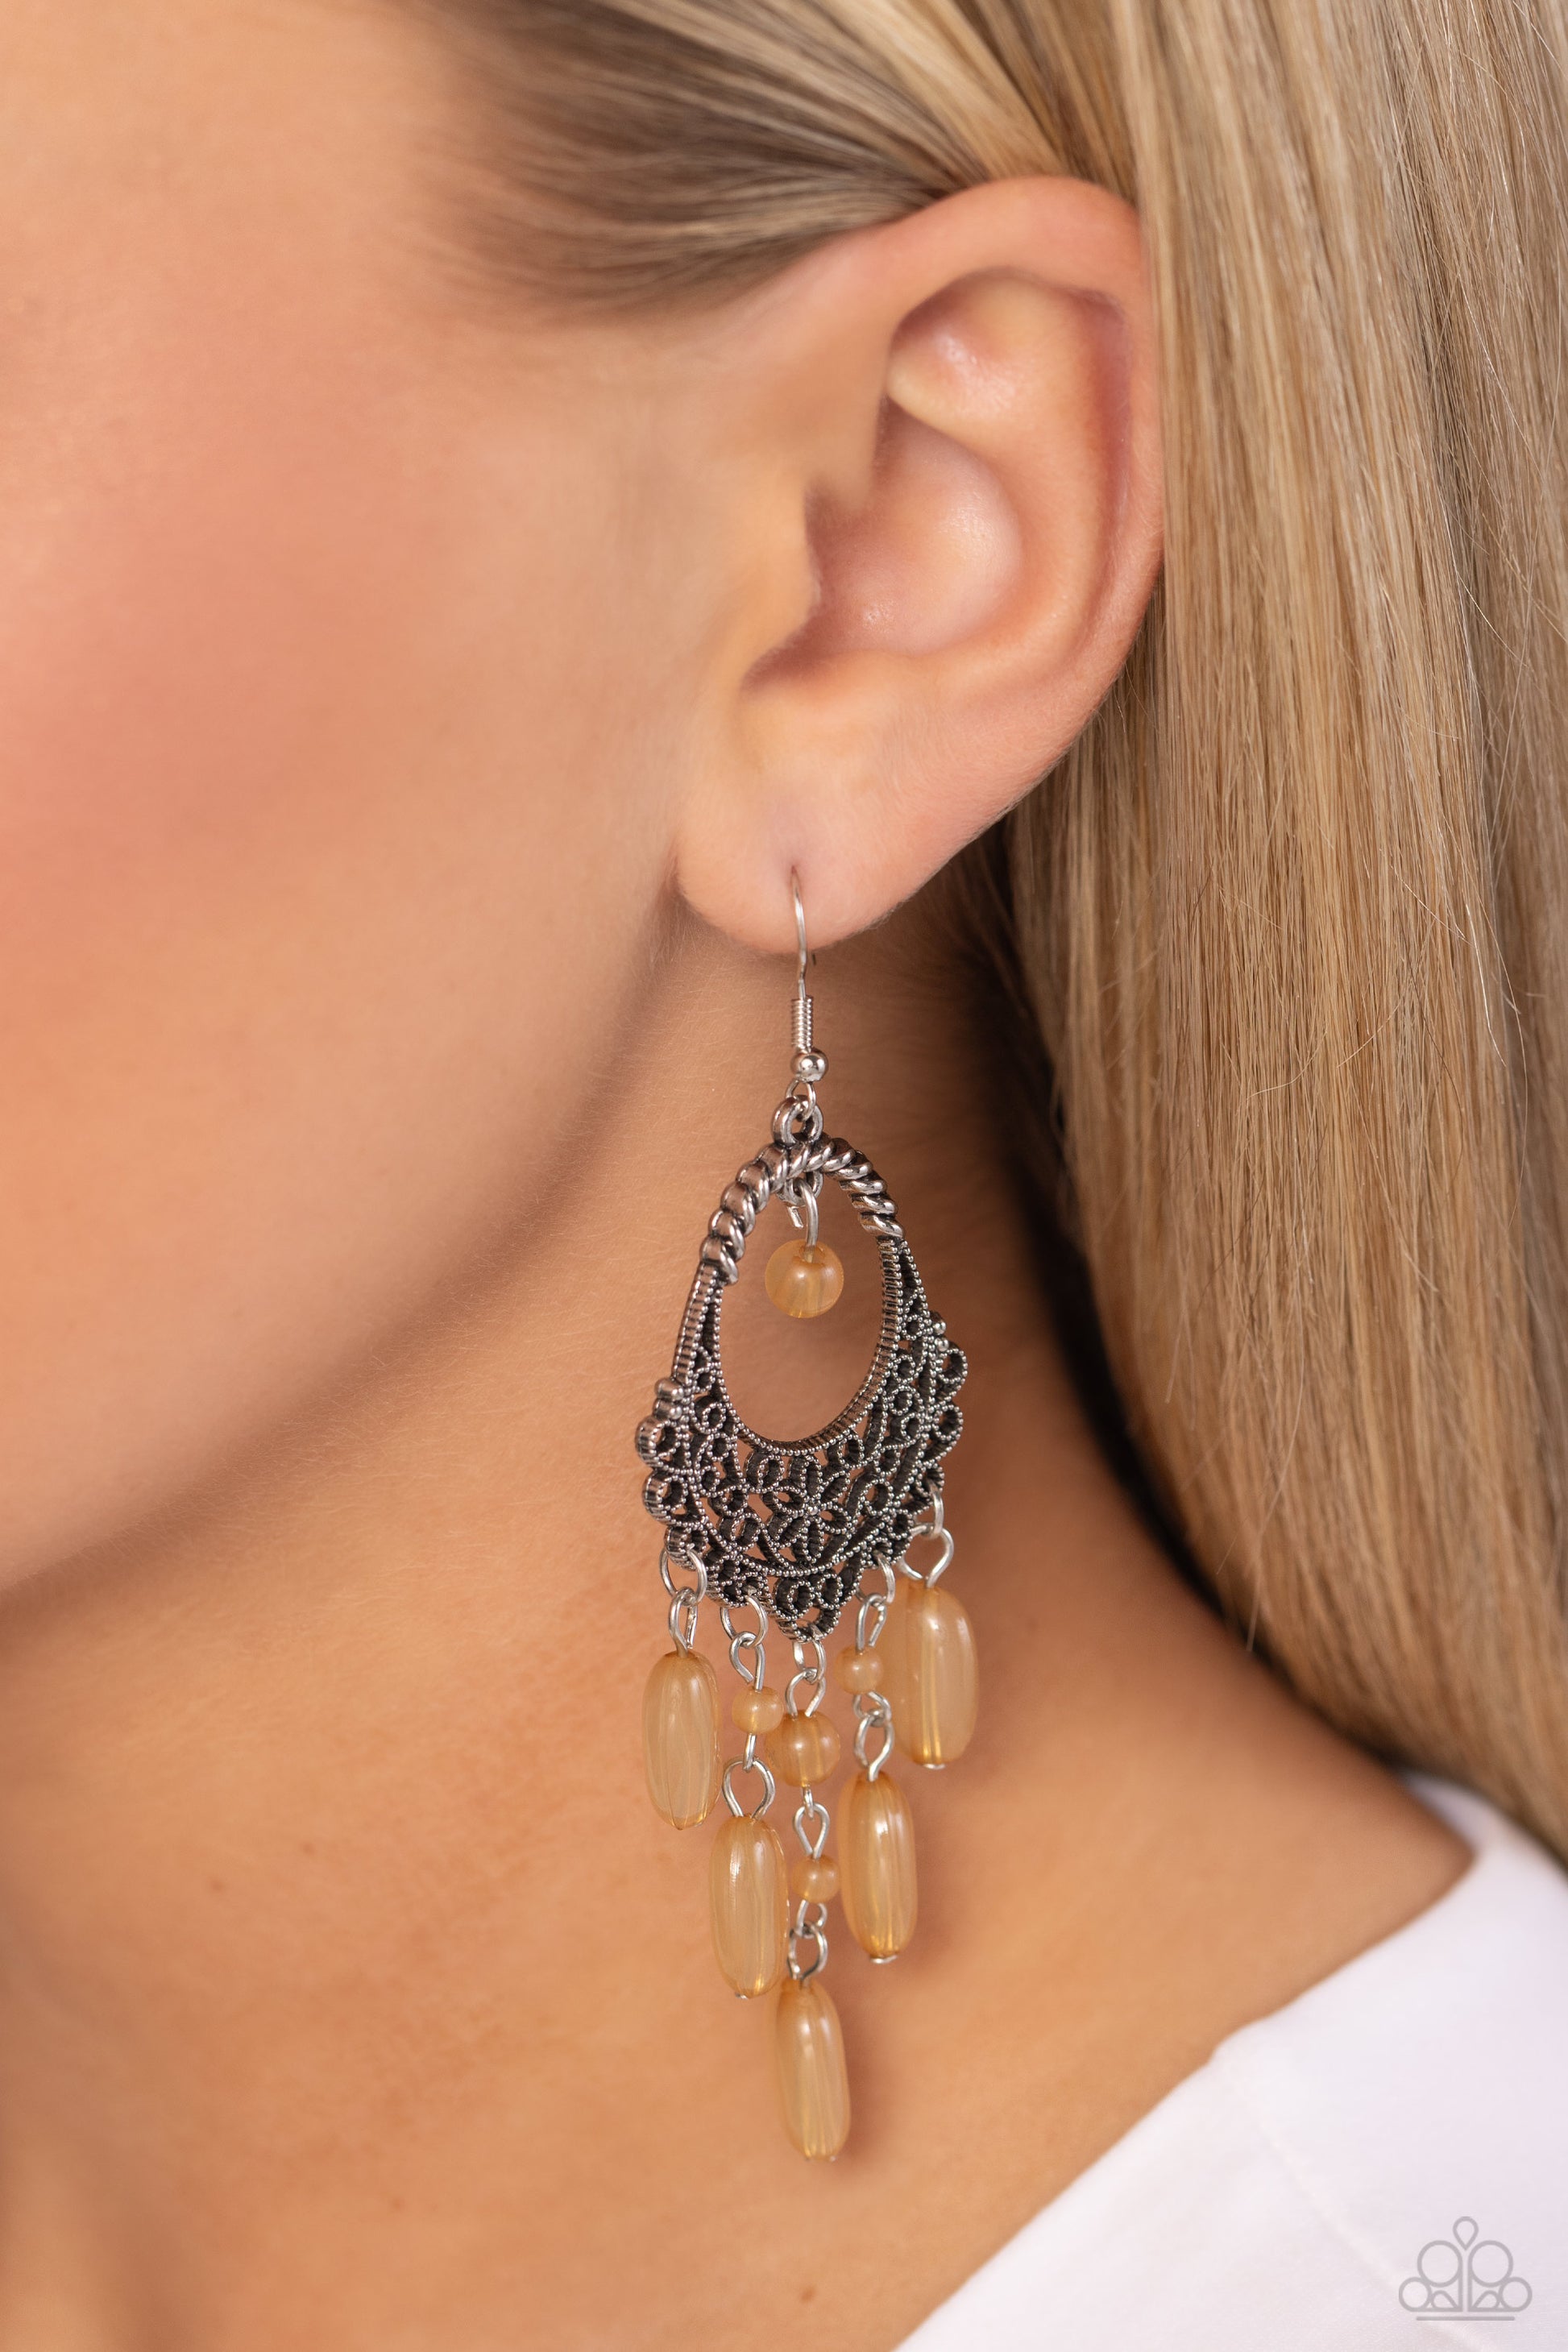 Paparazzi Accessories - Botanical Escape - Brown Earrings studded silver filigree vines across the bottom of a decorative teardrop frame, blooming into a whimsical floral pattern. A single brown bead swings from the top of the frame, colorfully complementing the round and oval beaded fringe dancing from the bottom of the display. Earring attaches to a standard fishhook fitting. Featured inside The Preview at Made for More! Sold as one pair of earrings.